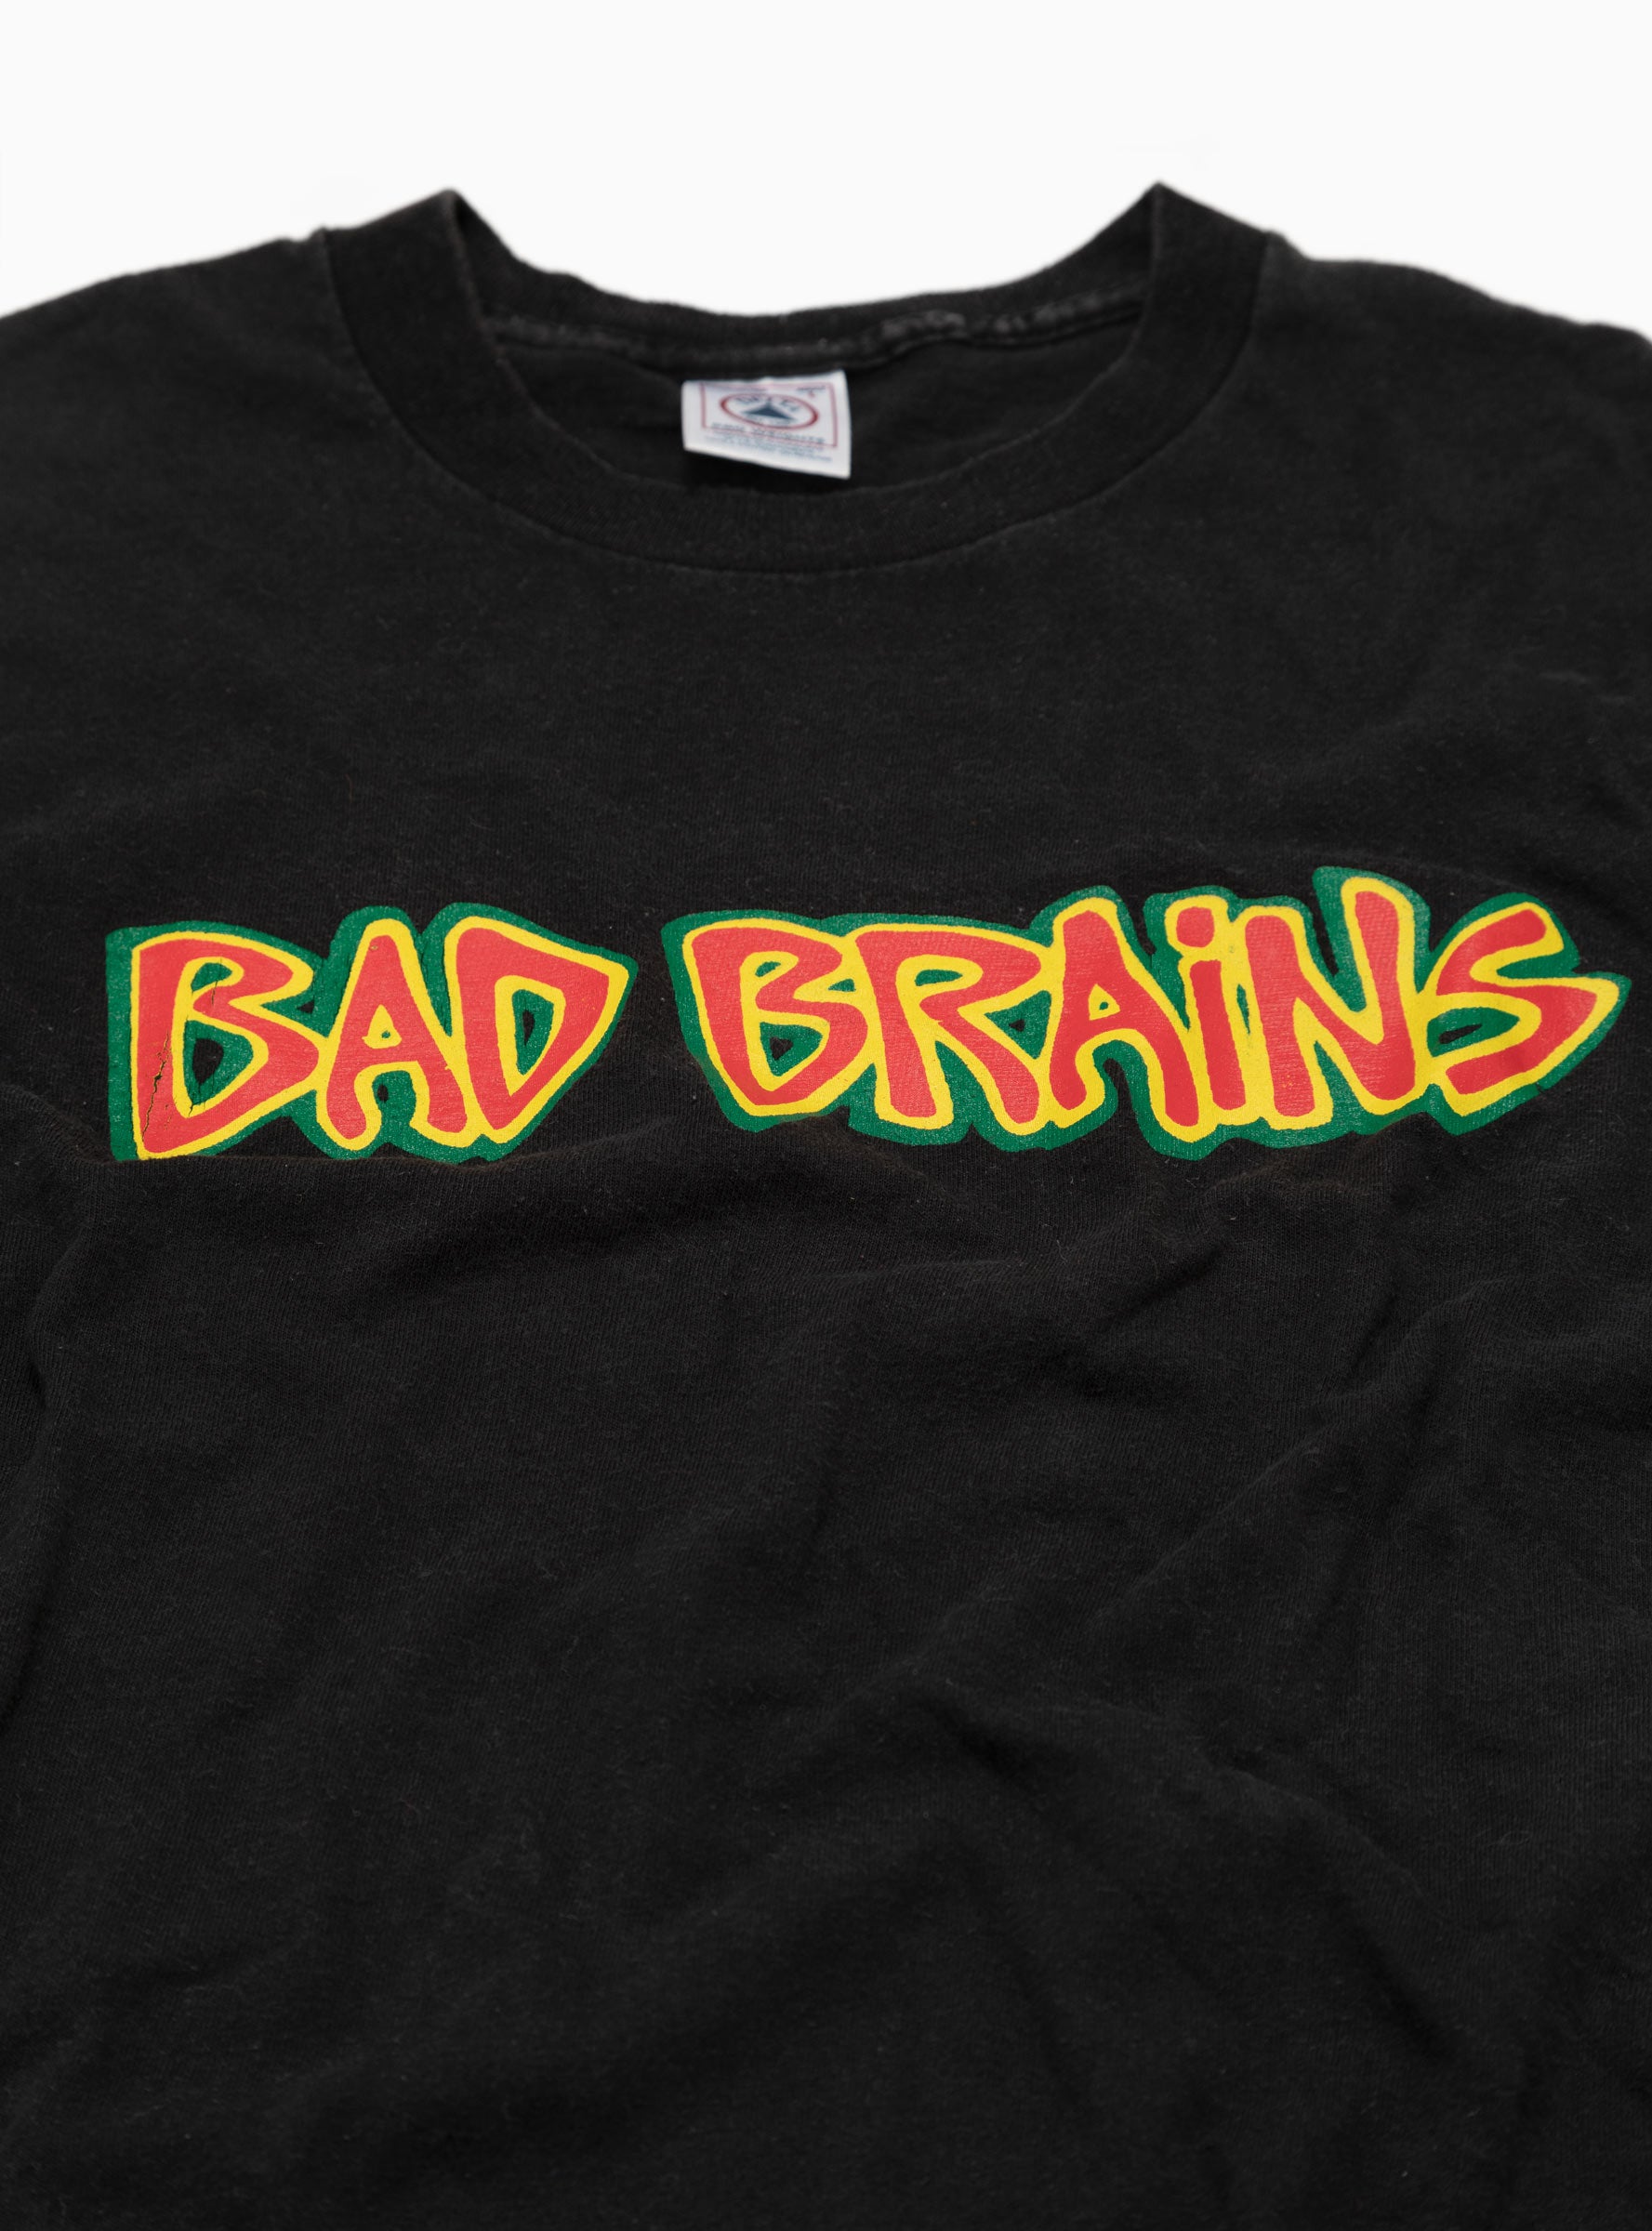 90s Bad Brains T-shirt Black by Unified Goods